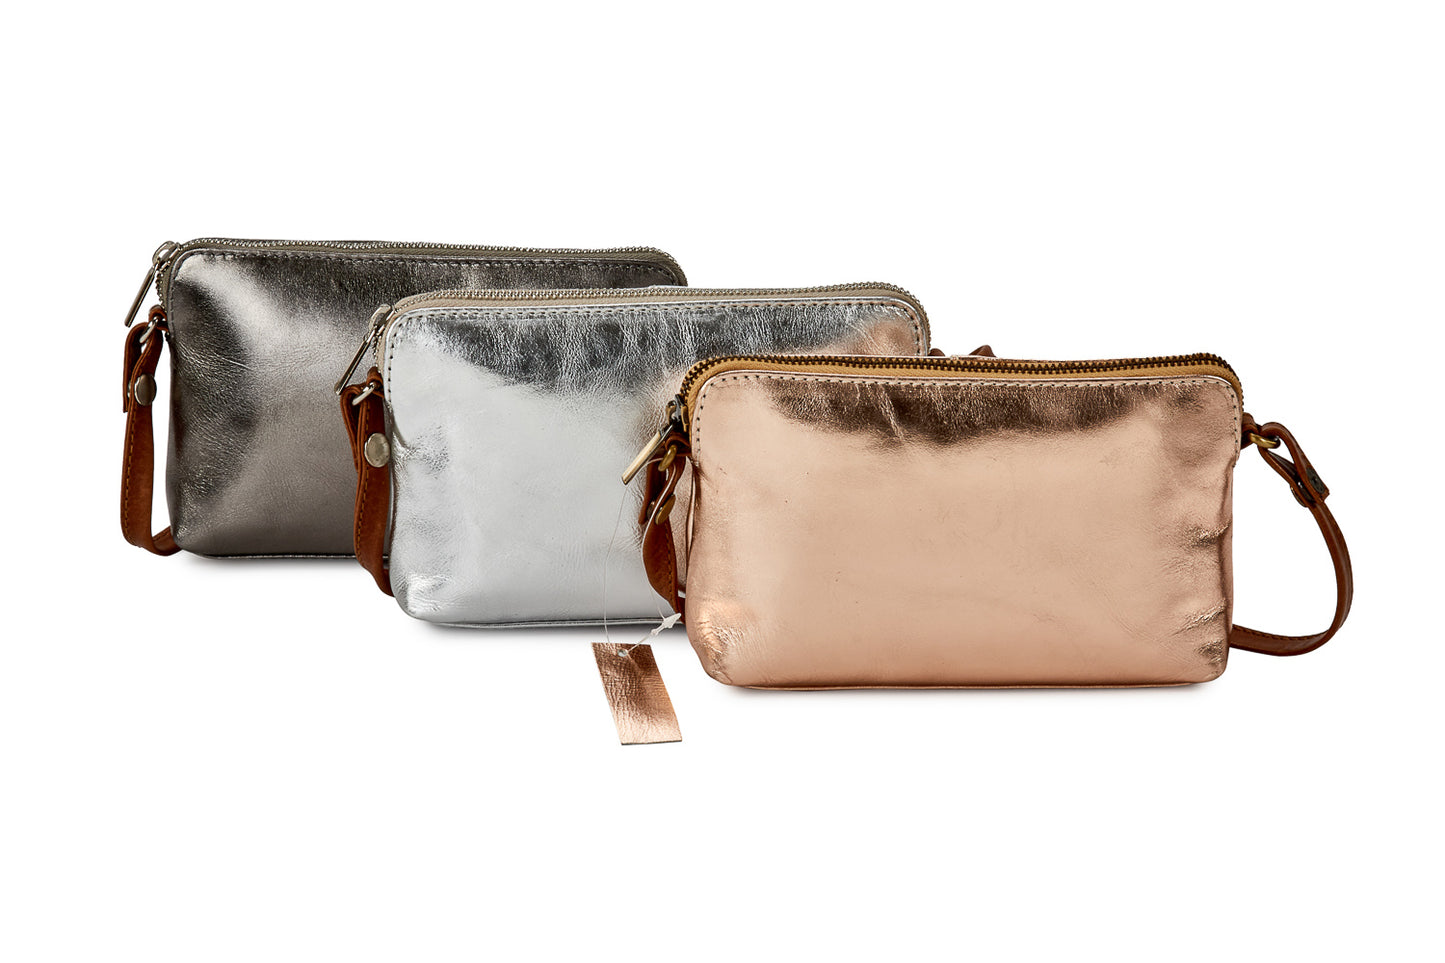 HYDESTYLE Metallic Magpie NEL Clutch Bag #LB87 Pewter